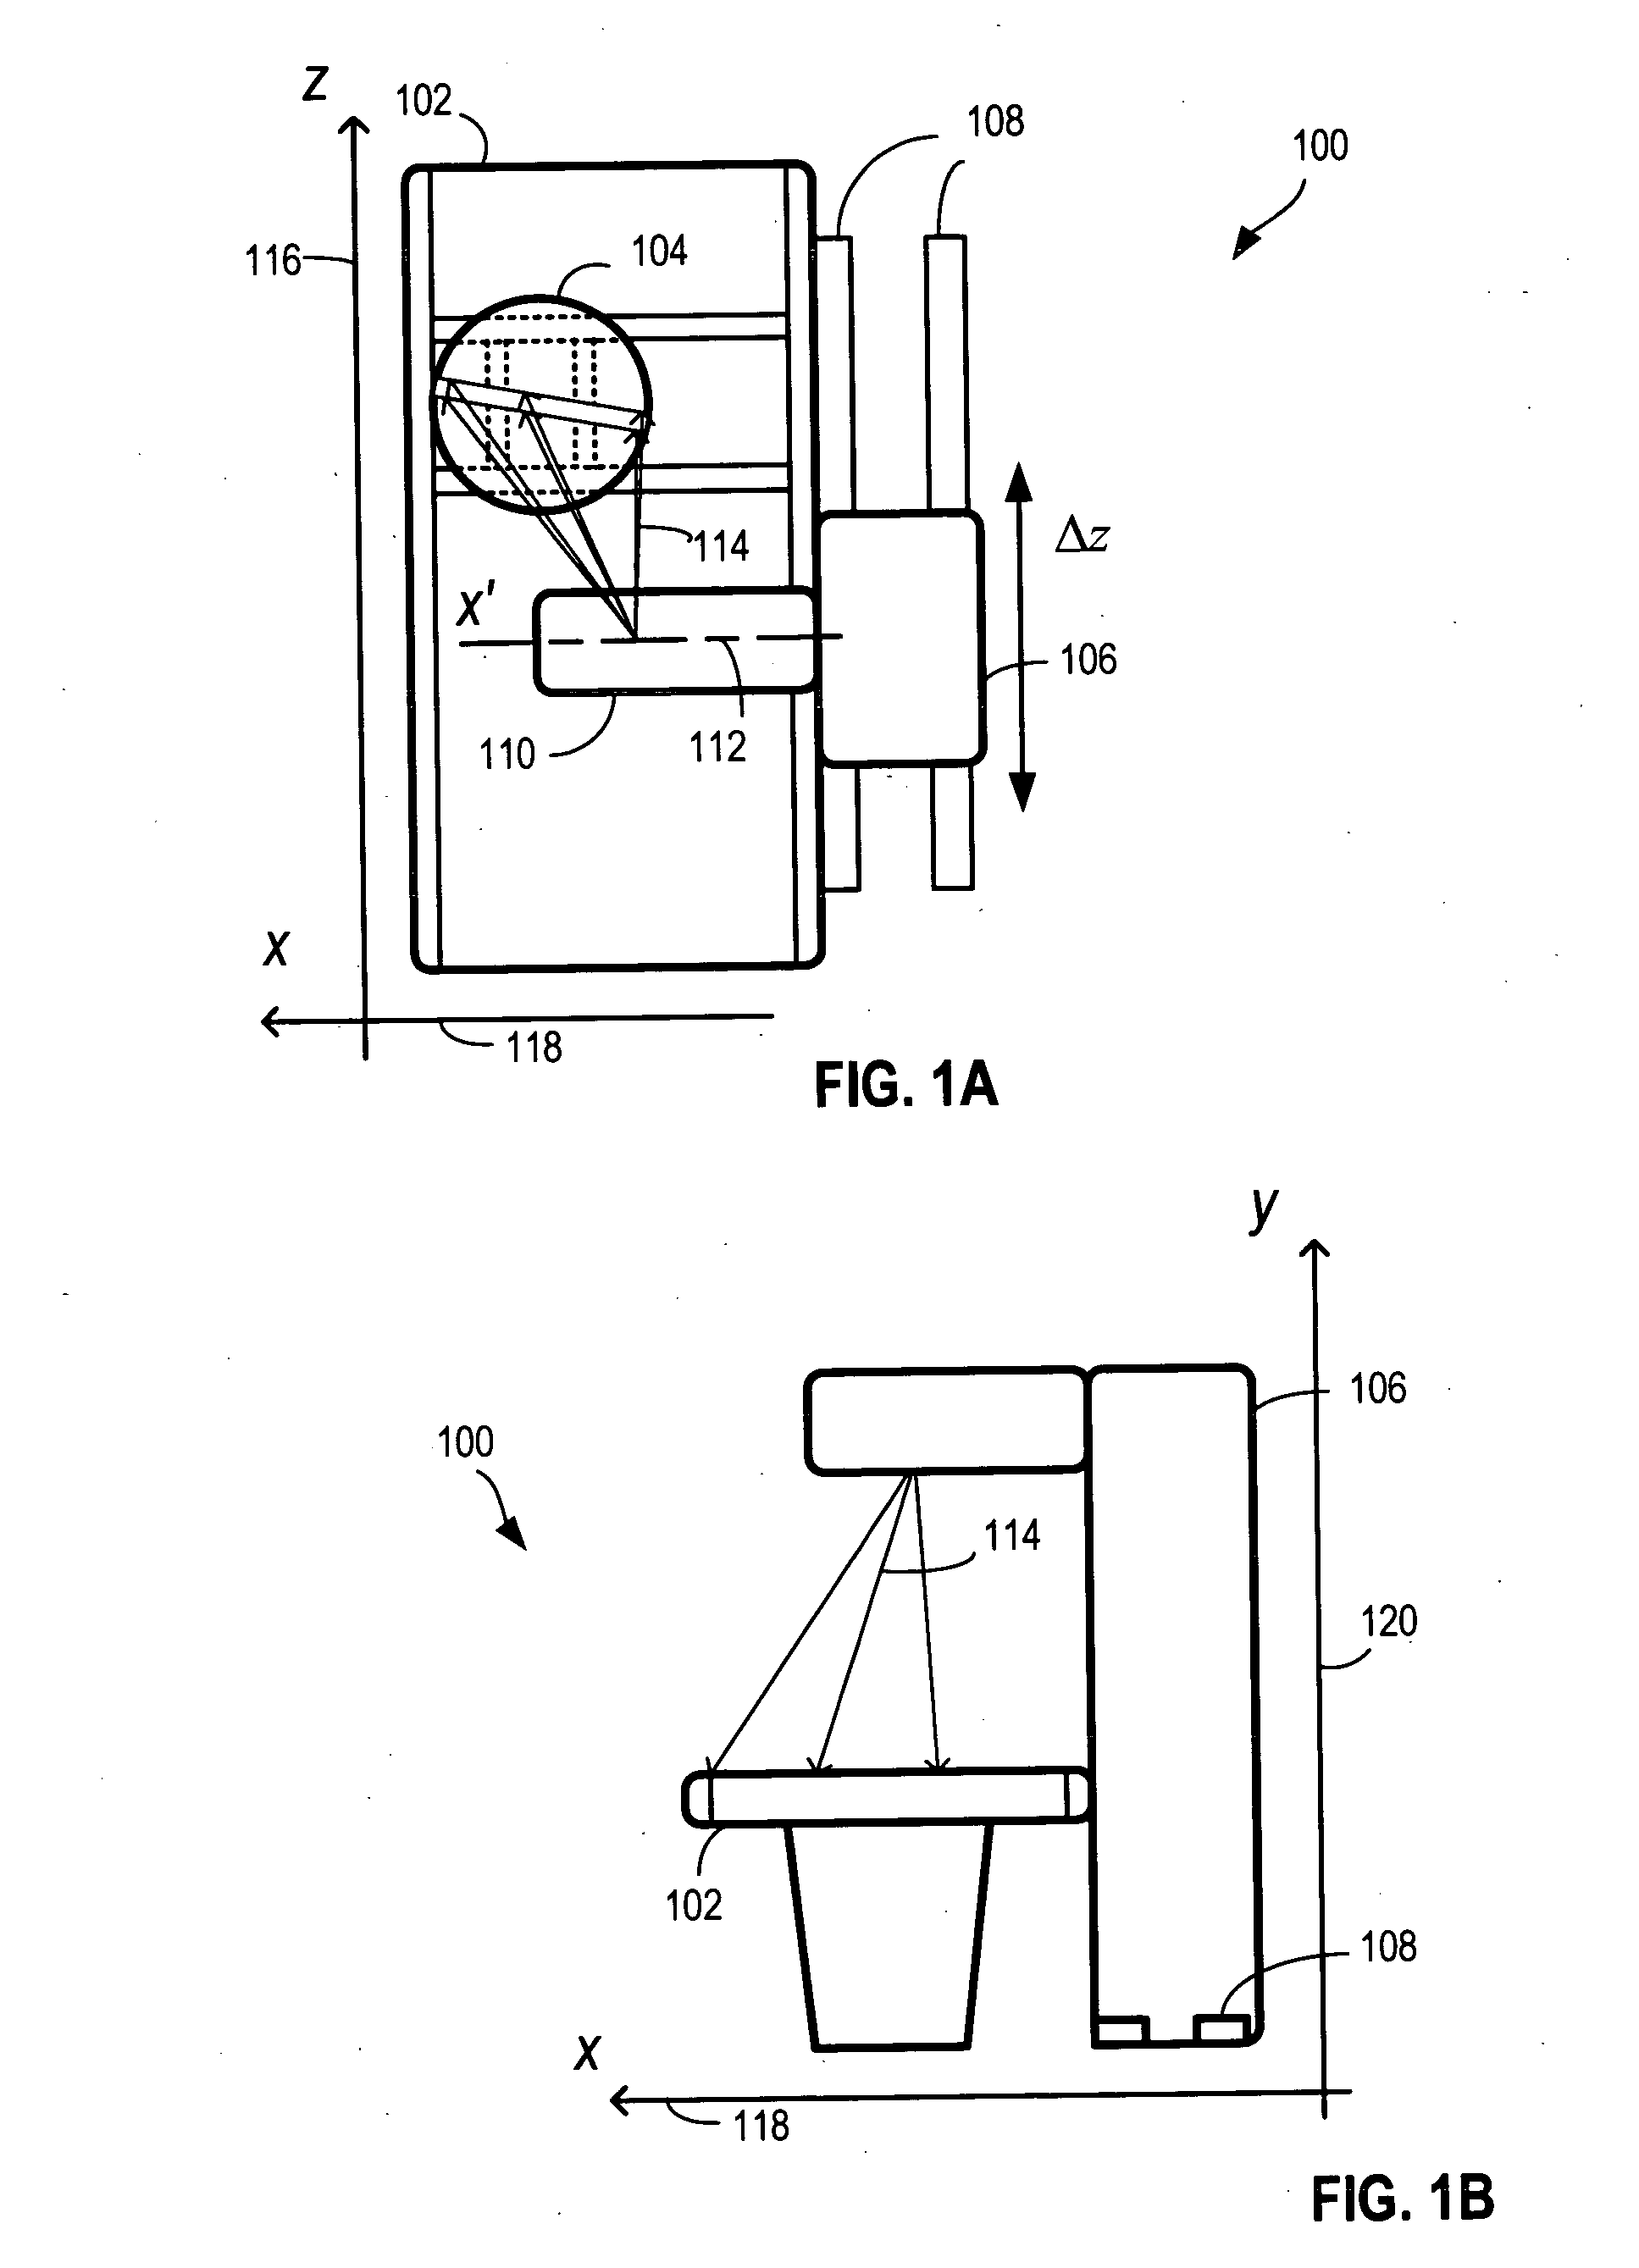 System for dynamic low dose x-ray imaging